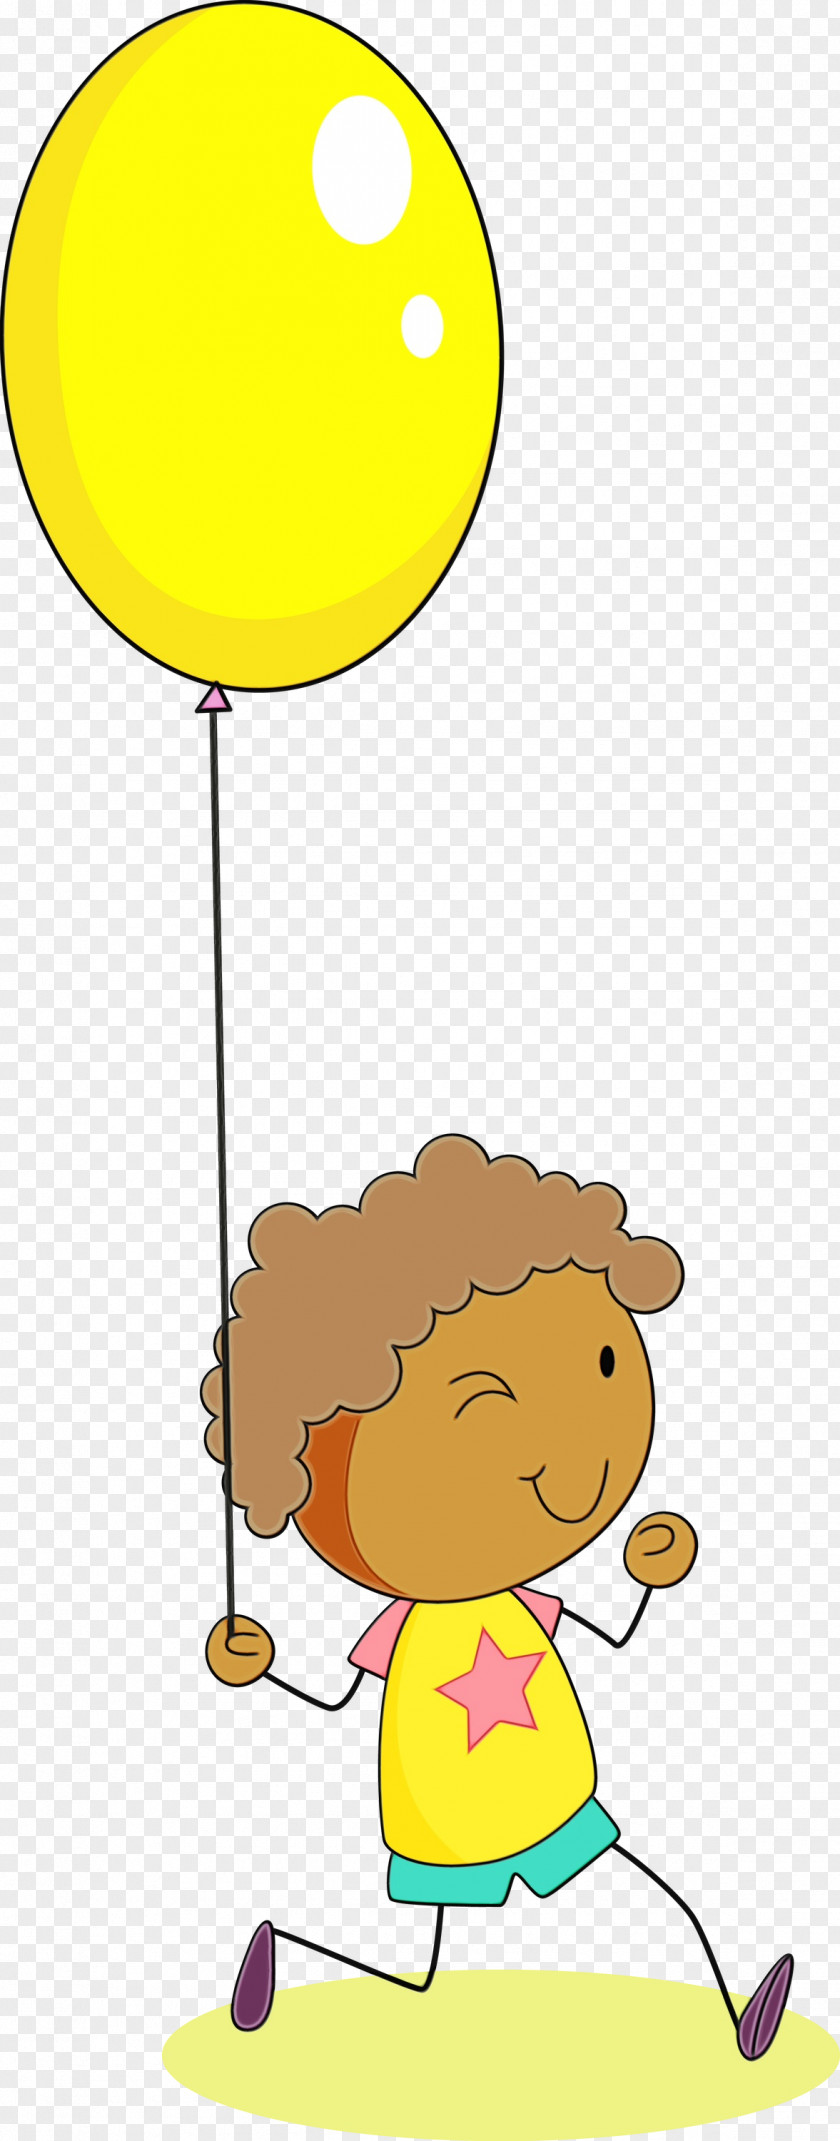 Yellow Cartoon Party Supply Balloon Happy PNG